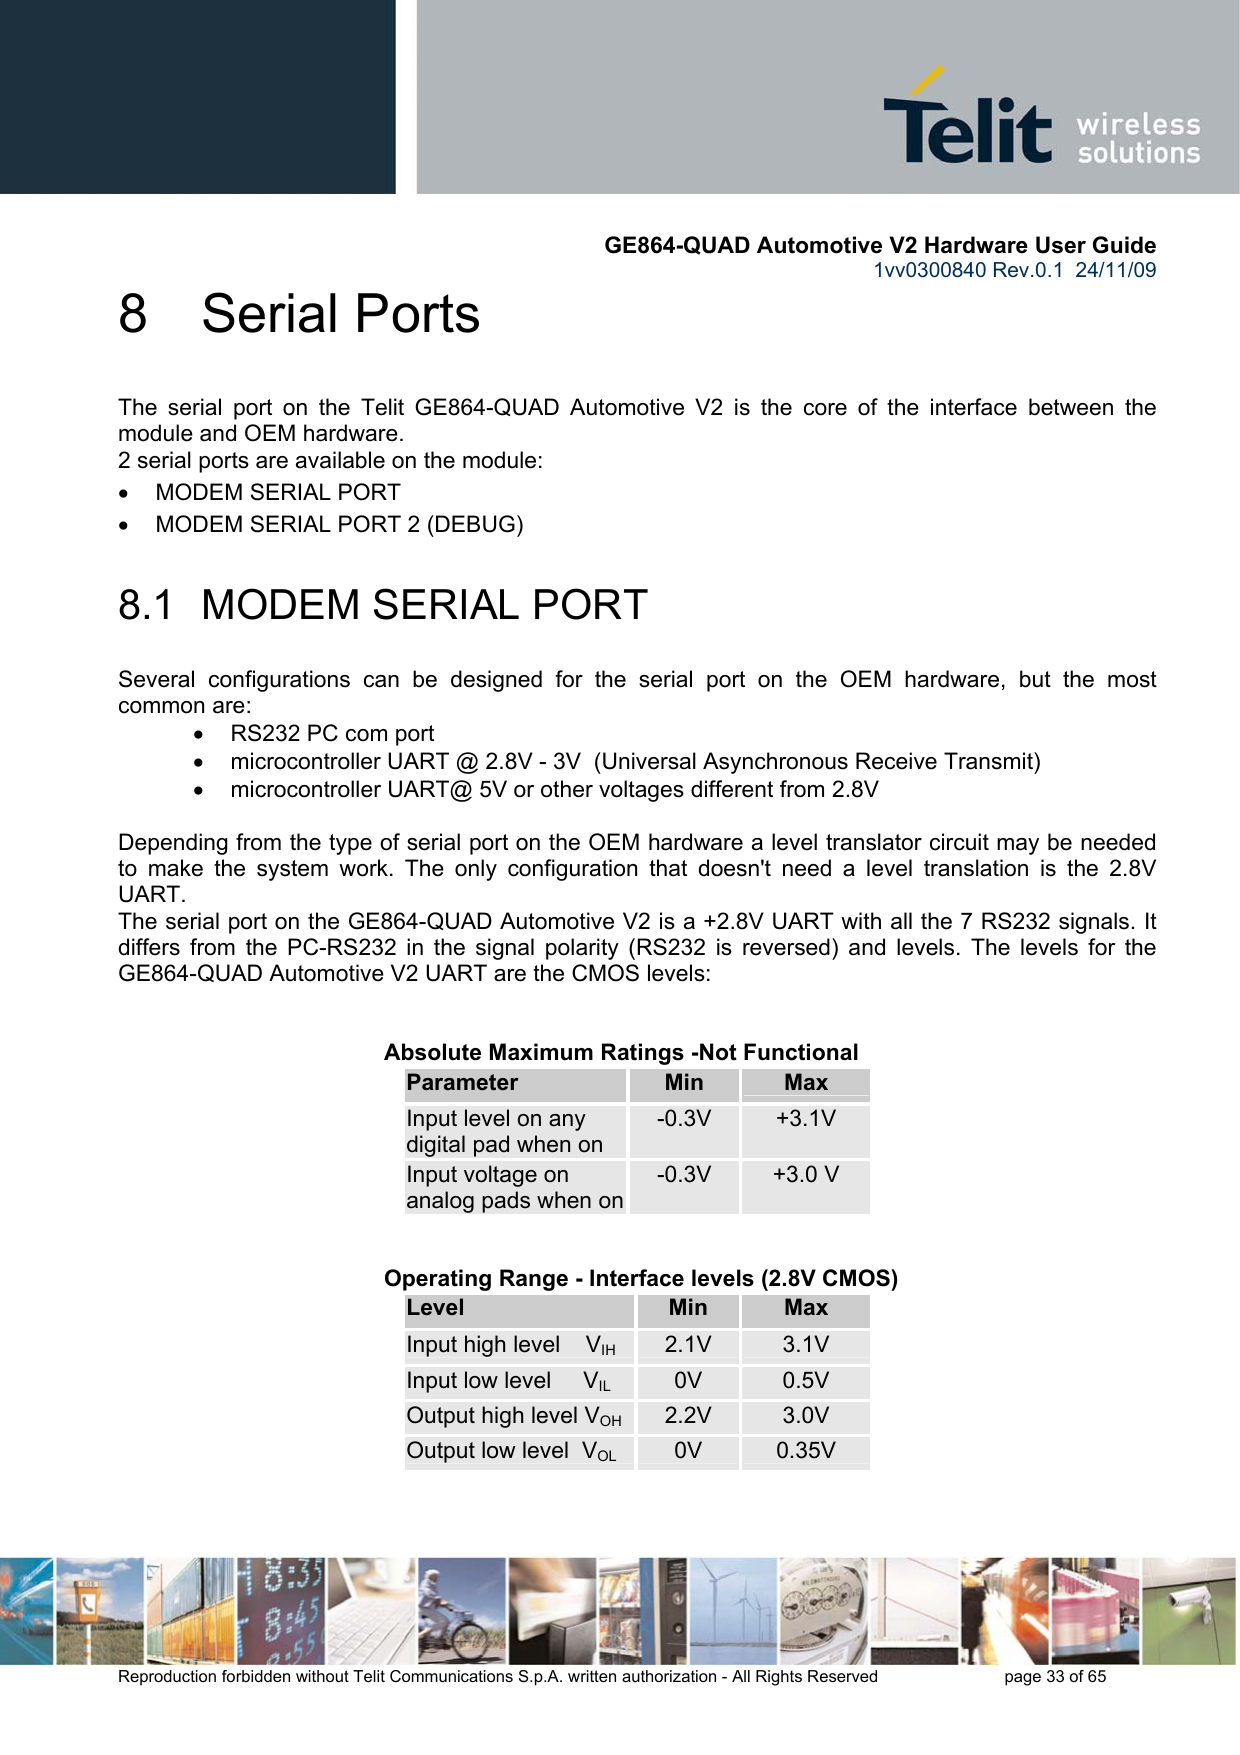       GE864-QUAD Automotive V2 Hardware User Guide 1vv0300840 Rev.0.1  24/11/09      Reproduction forbidden without Telit Communications S.p.A. written authorization - All Rights Reserved    page 33 of 65  8  Serial Ports The serial port on the Telit GE864-QUAD Automotive V2 is the core of the interface between the module and OEM hardware.  2 serial ports are available on the module: •  MODEM SERIAL PORT •  MODEM SERIAL PORT 2 (DEBUG)  8.1  MODEM SERIAL PORT Several configurations can be designed for the serial port on the OEM hardware, but the most common are: •  RS232 PC com port •  microcontroller UART @ 2.8V - 3V  (Universal Asynchronous Receive Transmit)  •  microcontroller UART@ 5V or other voltages different from 2.8V   Depending from the type of serial port on the OEM hardware a level translator circuit may be needed to make the system work. The only configuration that doesn&apos;t need a level translation is the 2.8V UART. The serial port on the GE864-QUAD Automotive V2 is a +2.8V UART with all the 7 RS232 signals. It differs from the PC-RS232 in the signal polarity (RS232 is reversed) and levels. The levels for the GE864-QUAD Automotive V2 UART are the CMOS levels:   Absolute Maximum Ratings -Not Functional Parameter  Min  Max Input level on any digital pad when on -0.3V  +3.1V Input voltage on analog pads when on-0.3V  +3.0 V      Operating Range - Interface levels (2.8V CMOS) Level  Min  Max Input high level    VIH  2.1V  3.1V Input low level     VIL 0V  0.5V Output high level VOH 2.2V  3.0V Output low level  VOL 0V  0.35V   